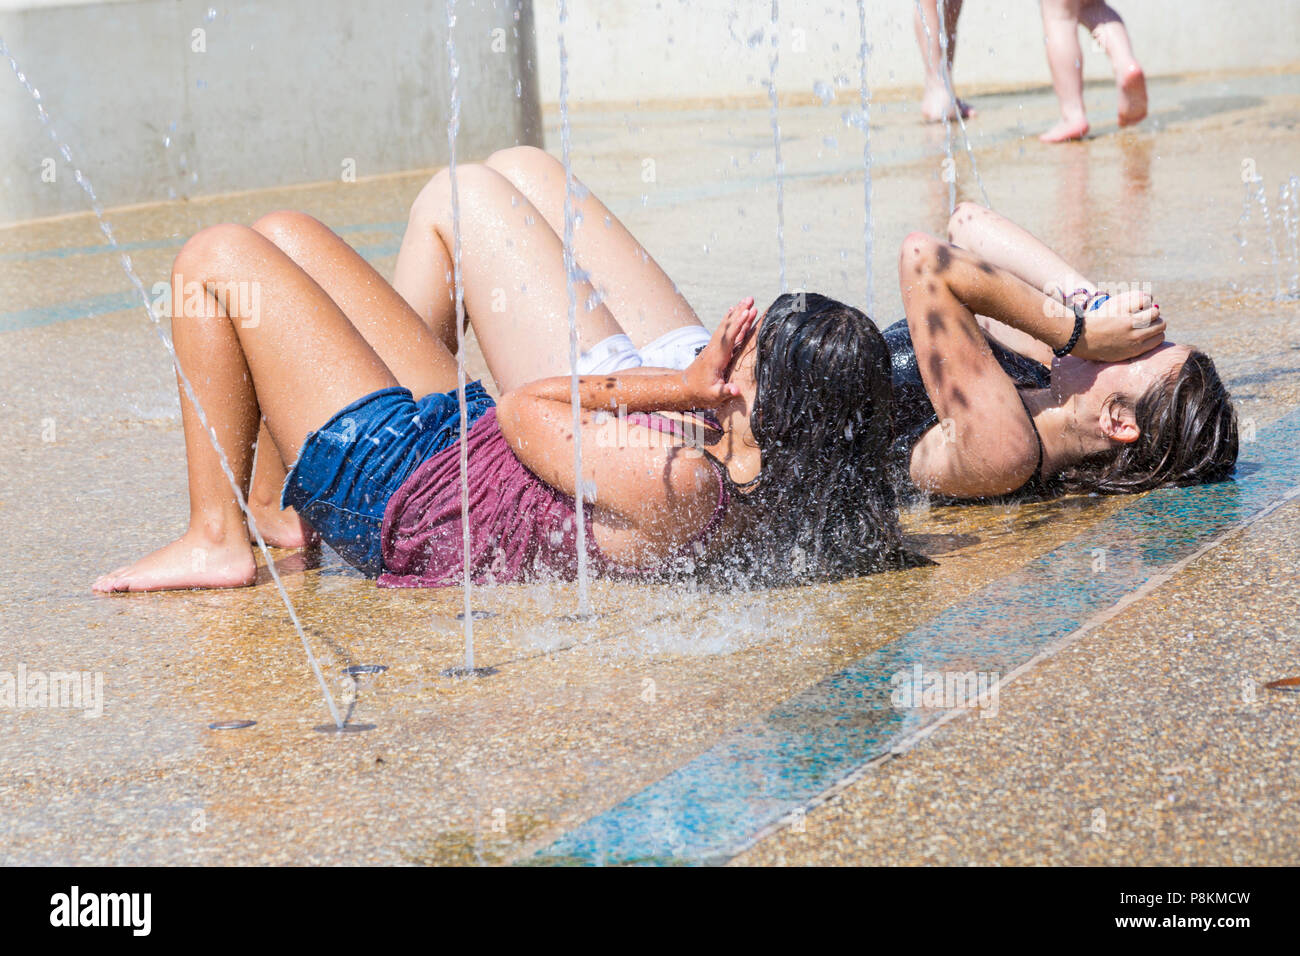 Bournemouth, Dorset, UK. 12th July 2018. UK weather: still no rain at Bournemouth! The heatwave continues with another hot sunny day, as sunseekers make the most of the glorious weather and head to the seaside at Bournemouth beaches. Cooling down! Credit: Carolyn Jenkins/Alamy Live News Stock Photo